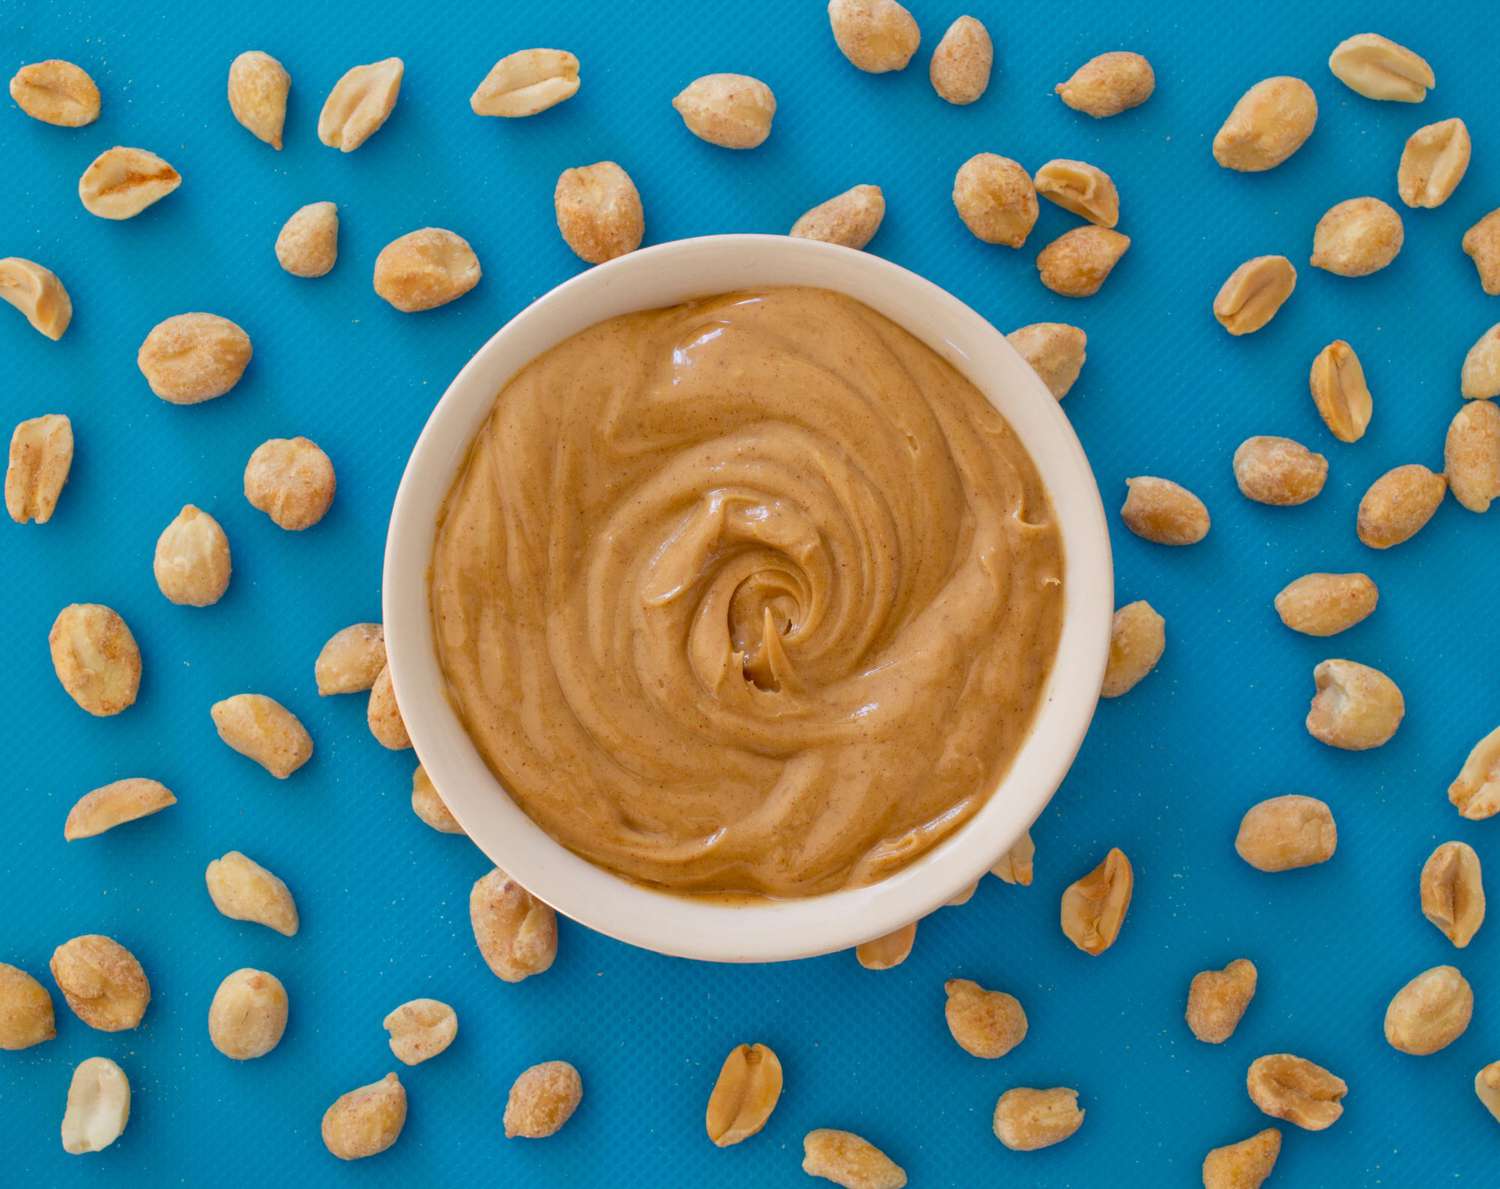 An image of peanut butter and peanuts on a blue background.